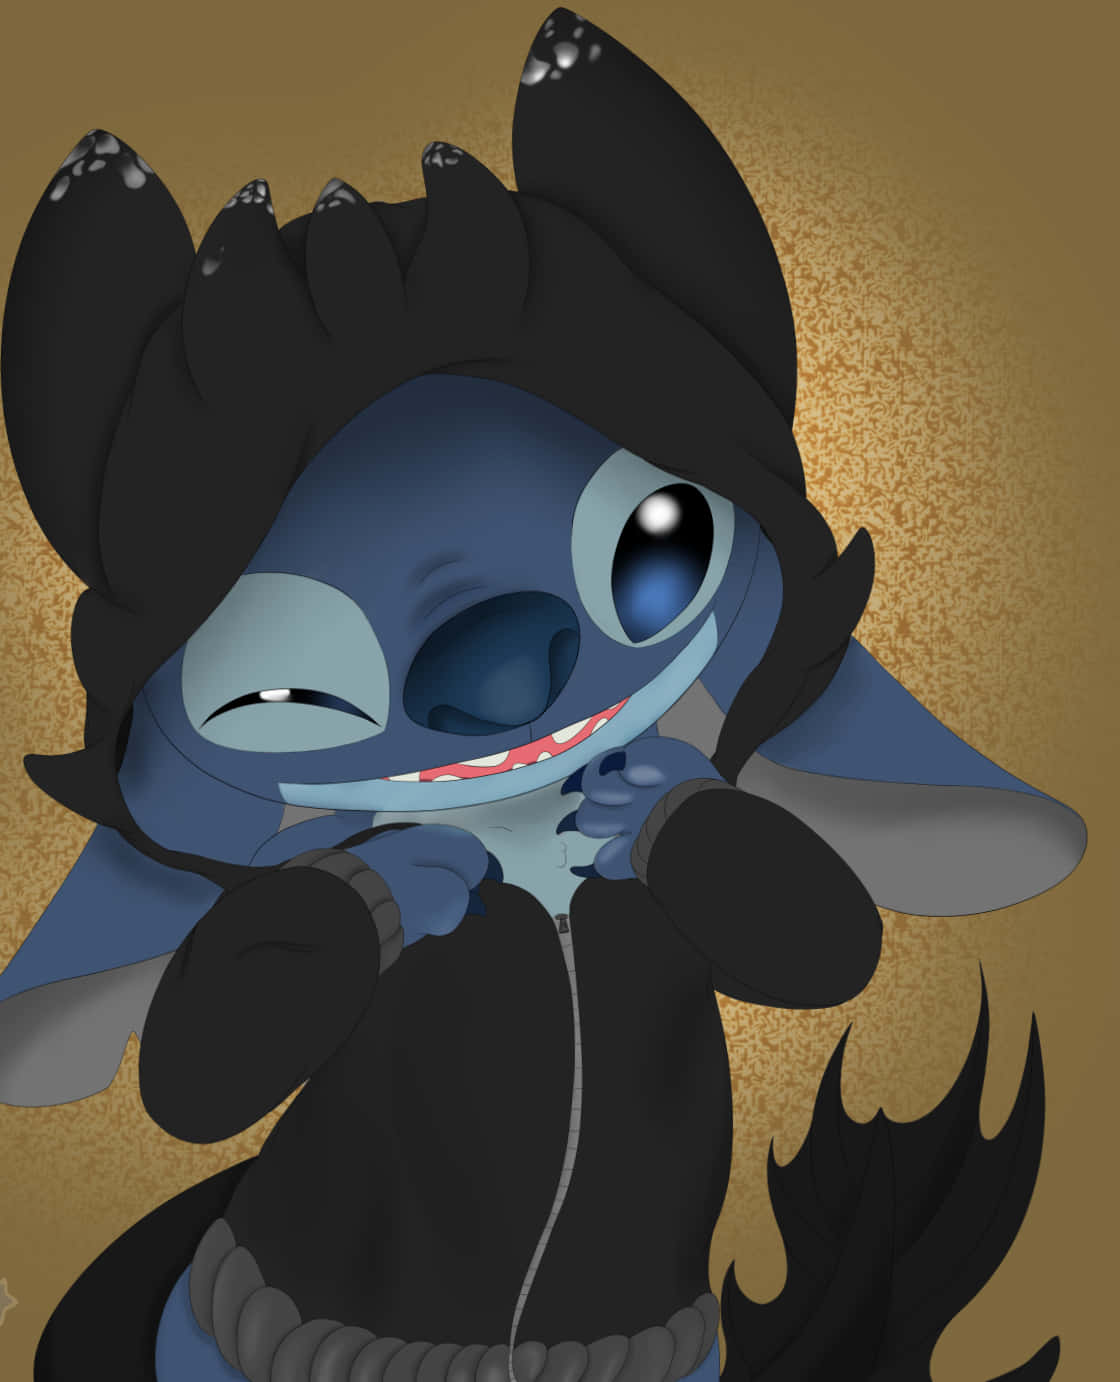 Download Stitch Halloween Black Dragon Outfit Wallpaper | Wallpapers.com